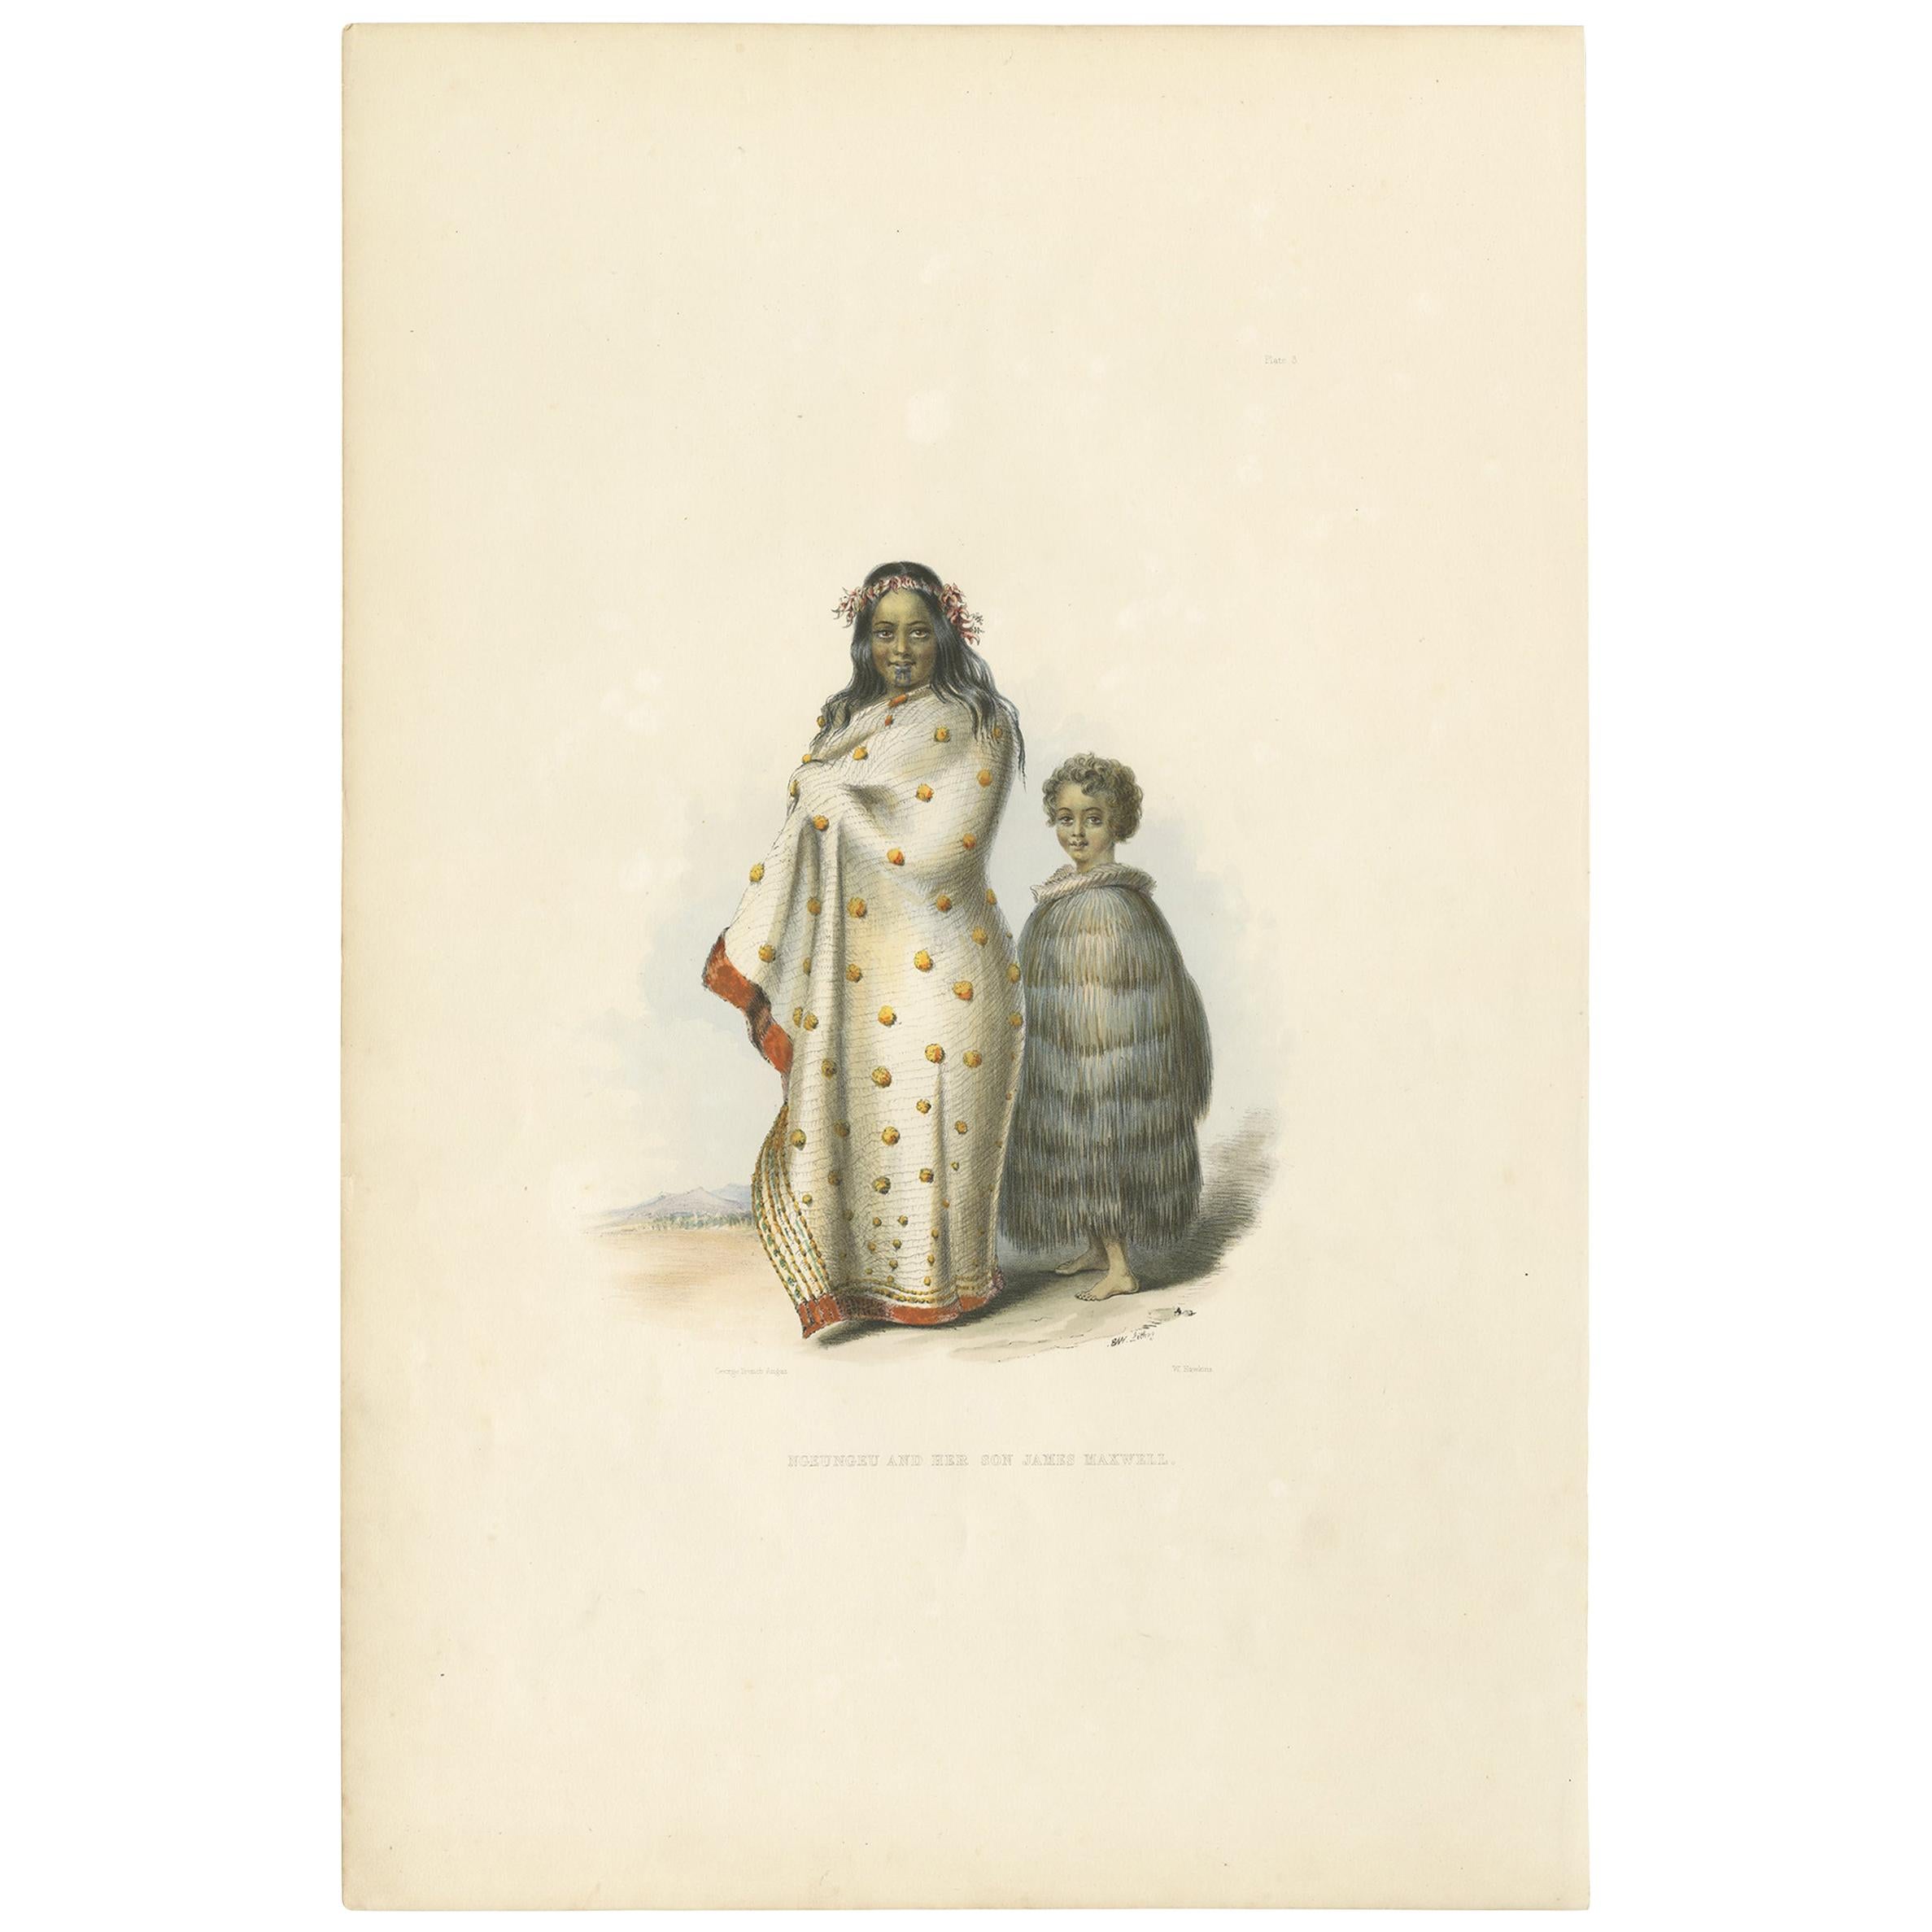 Antique Print of Ngeungeu and Her Son by Angas, '1847'